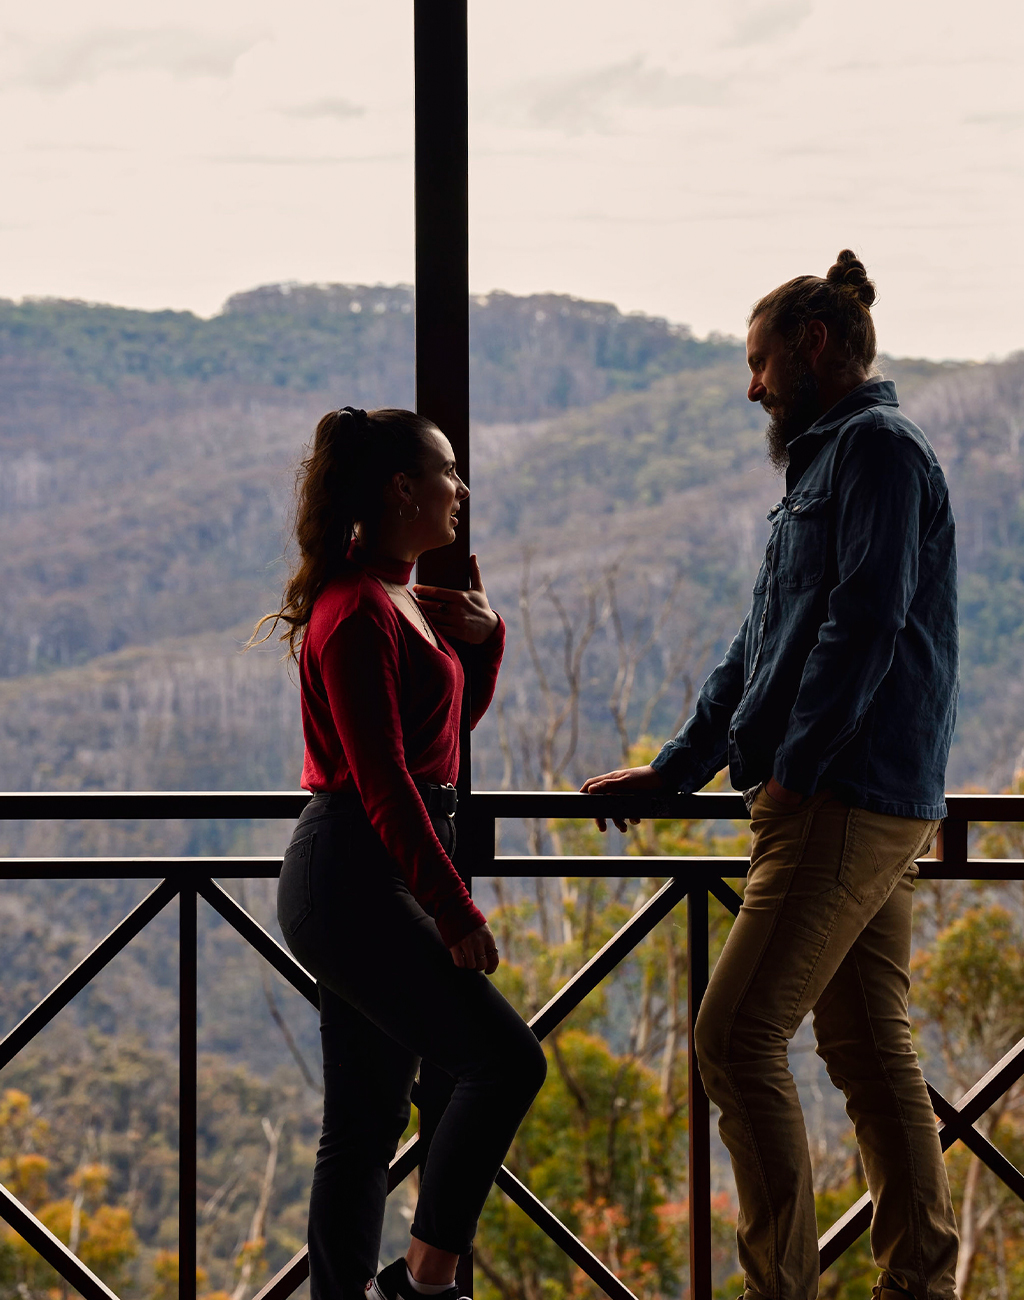 Two people talking on a rustic deck with sweeping mountain views